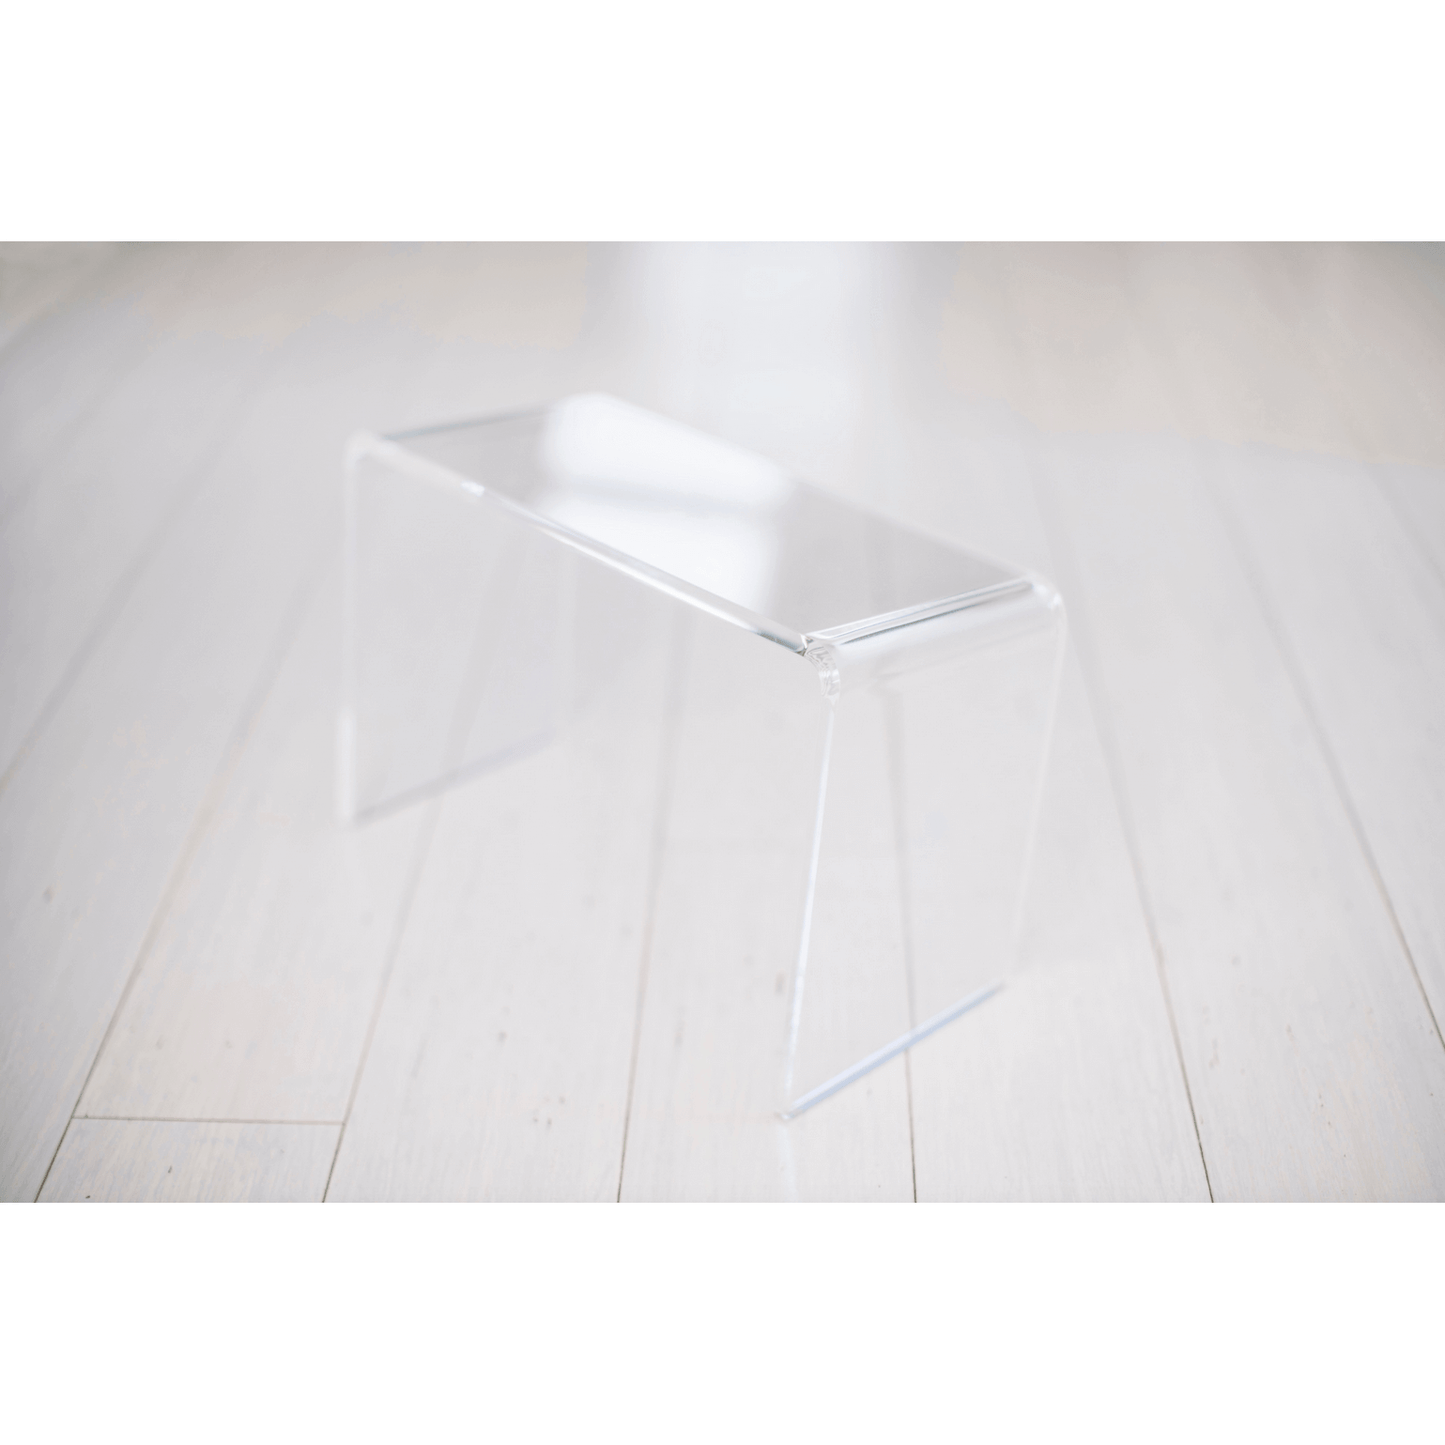 The PROPPR Acer - Clear Toilet Foot Stool - front view in a bathroom